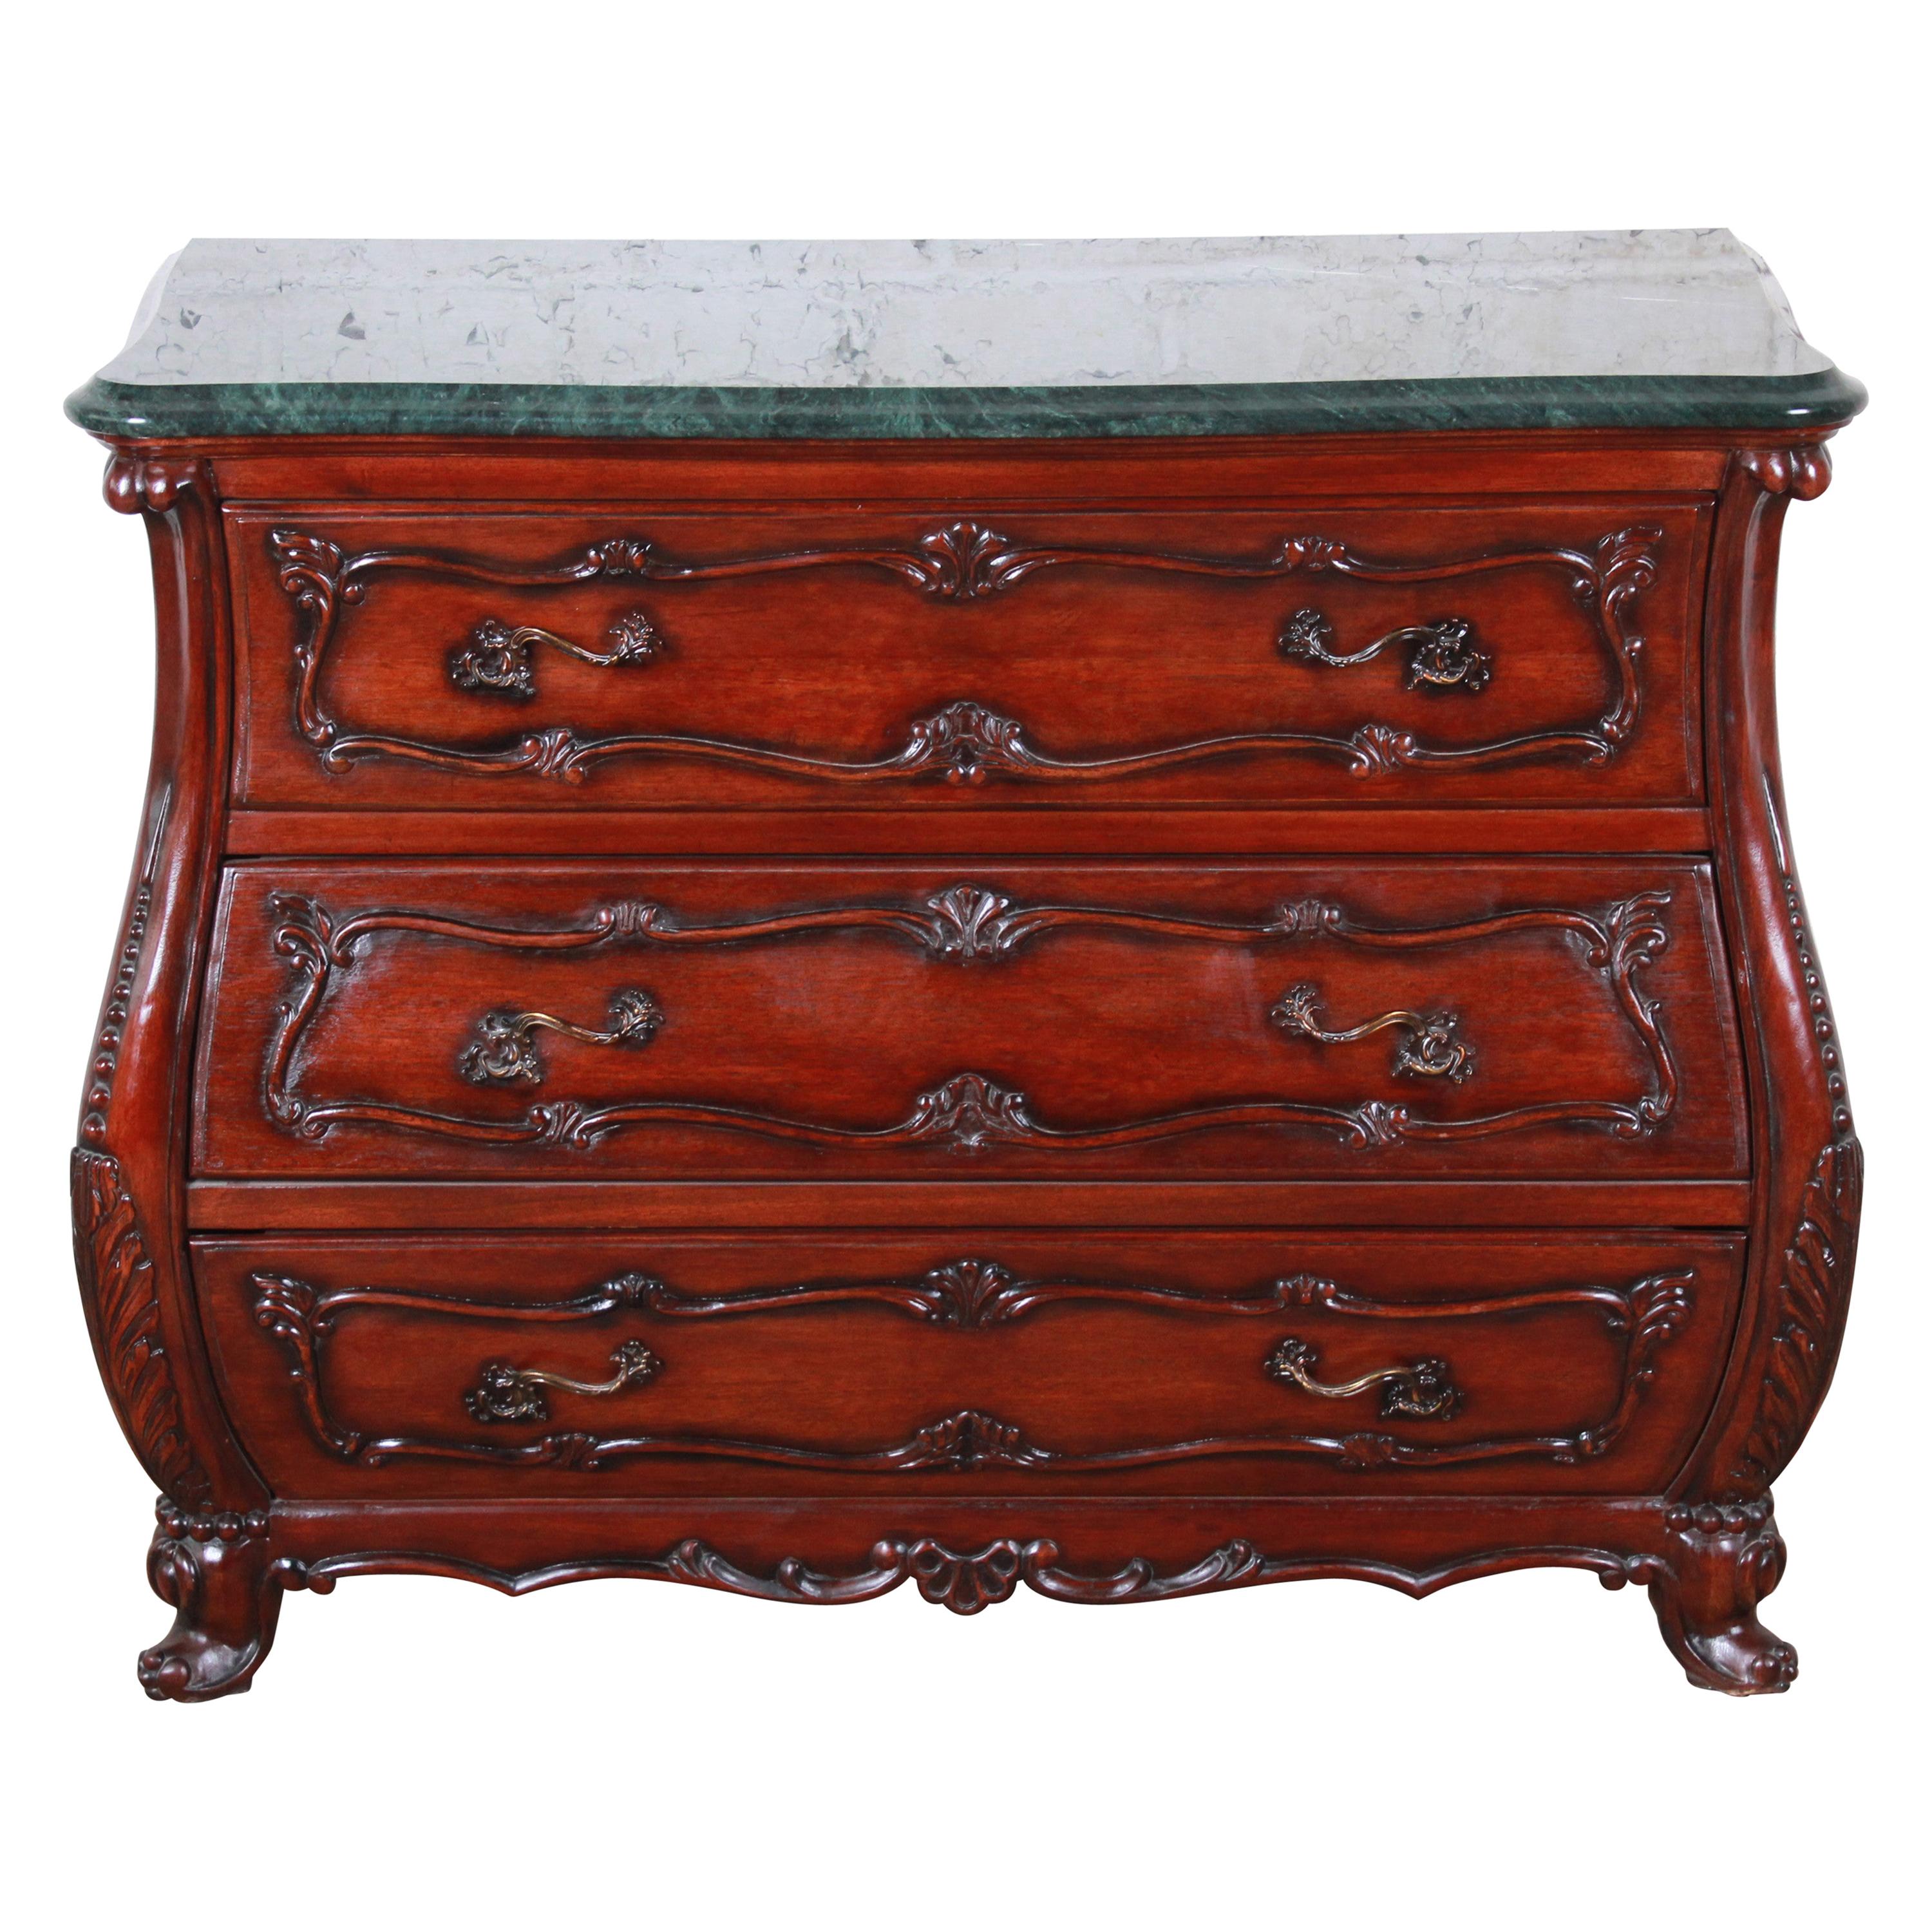 French Louis XV Style Mahogany Marble-Top Bombay Chest or Commode